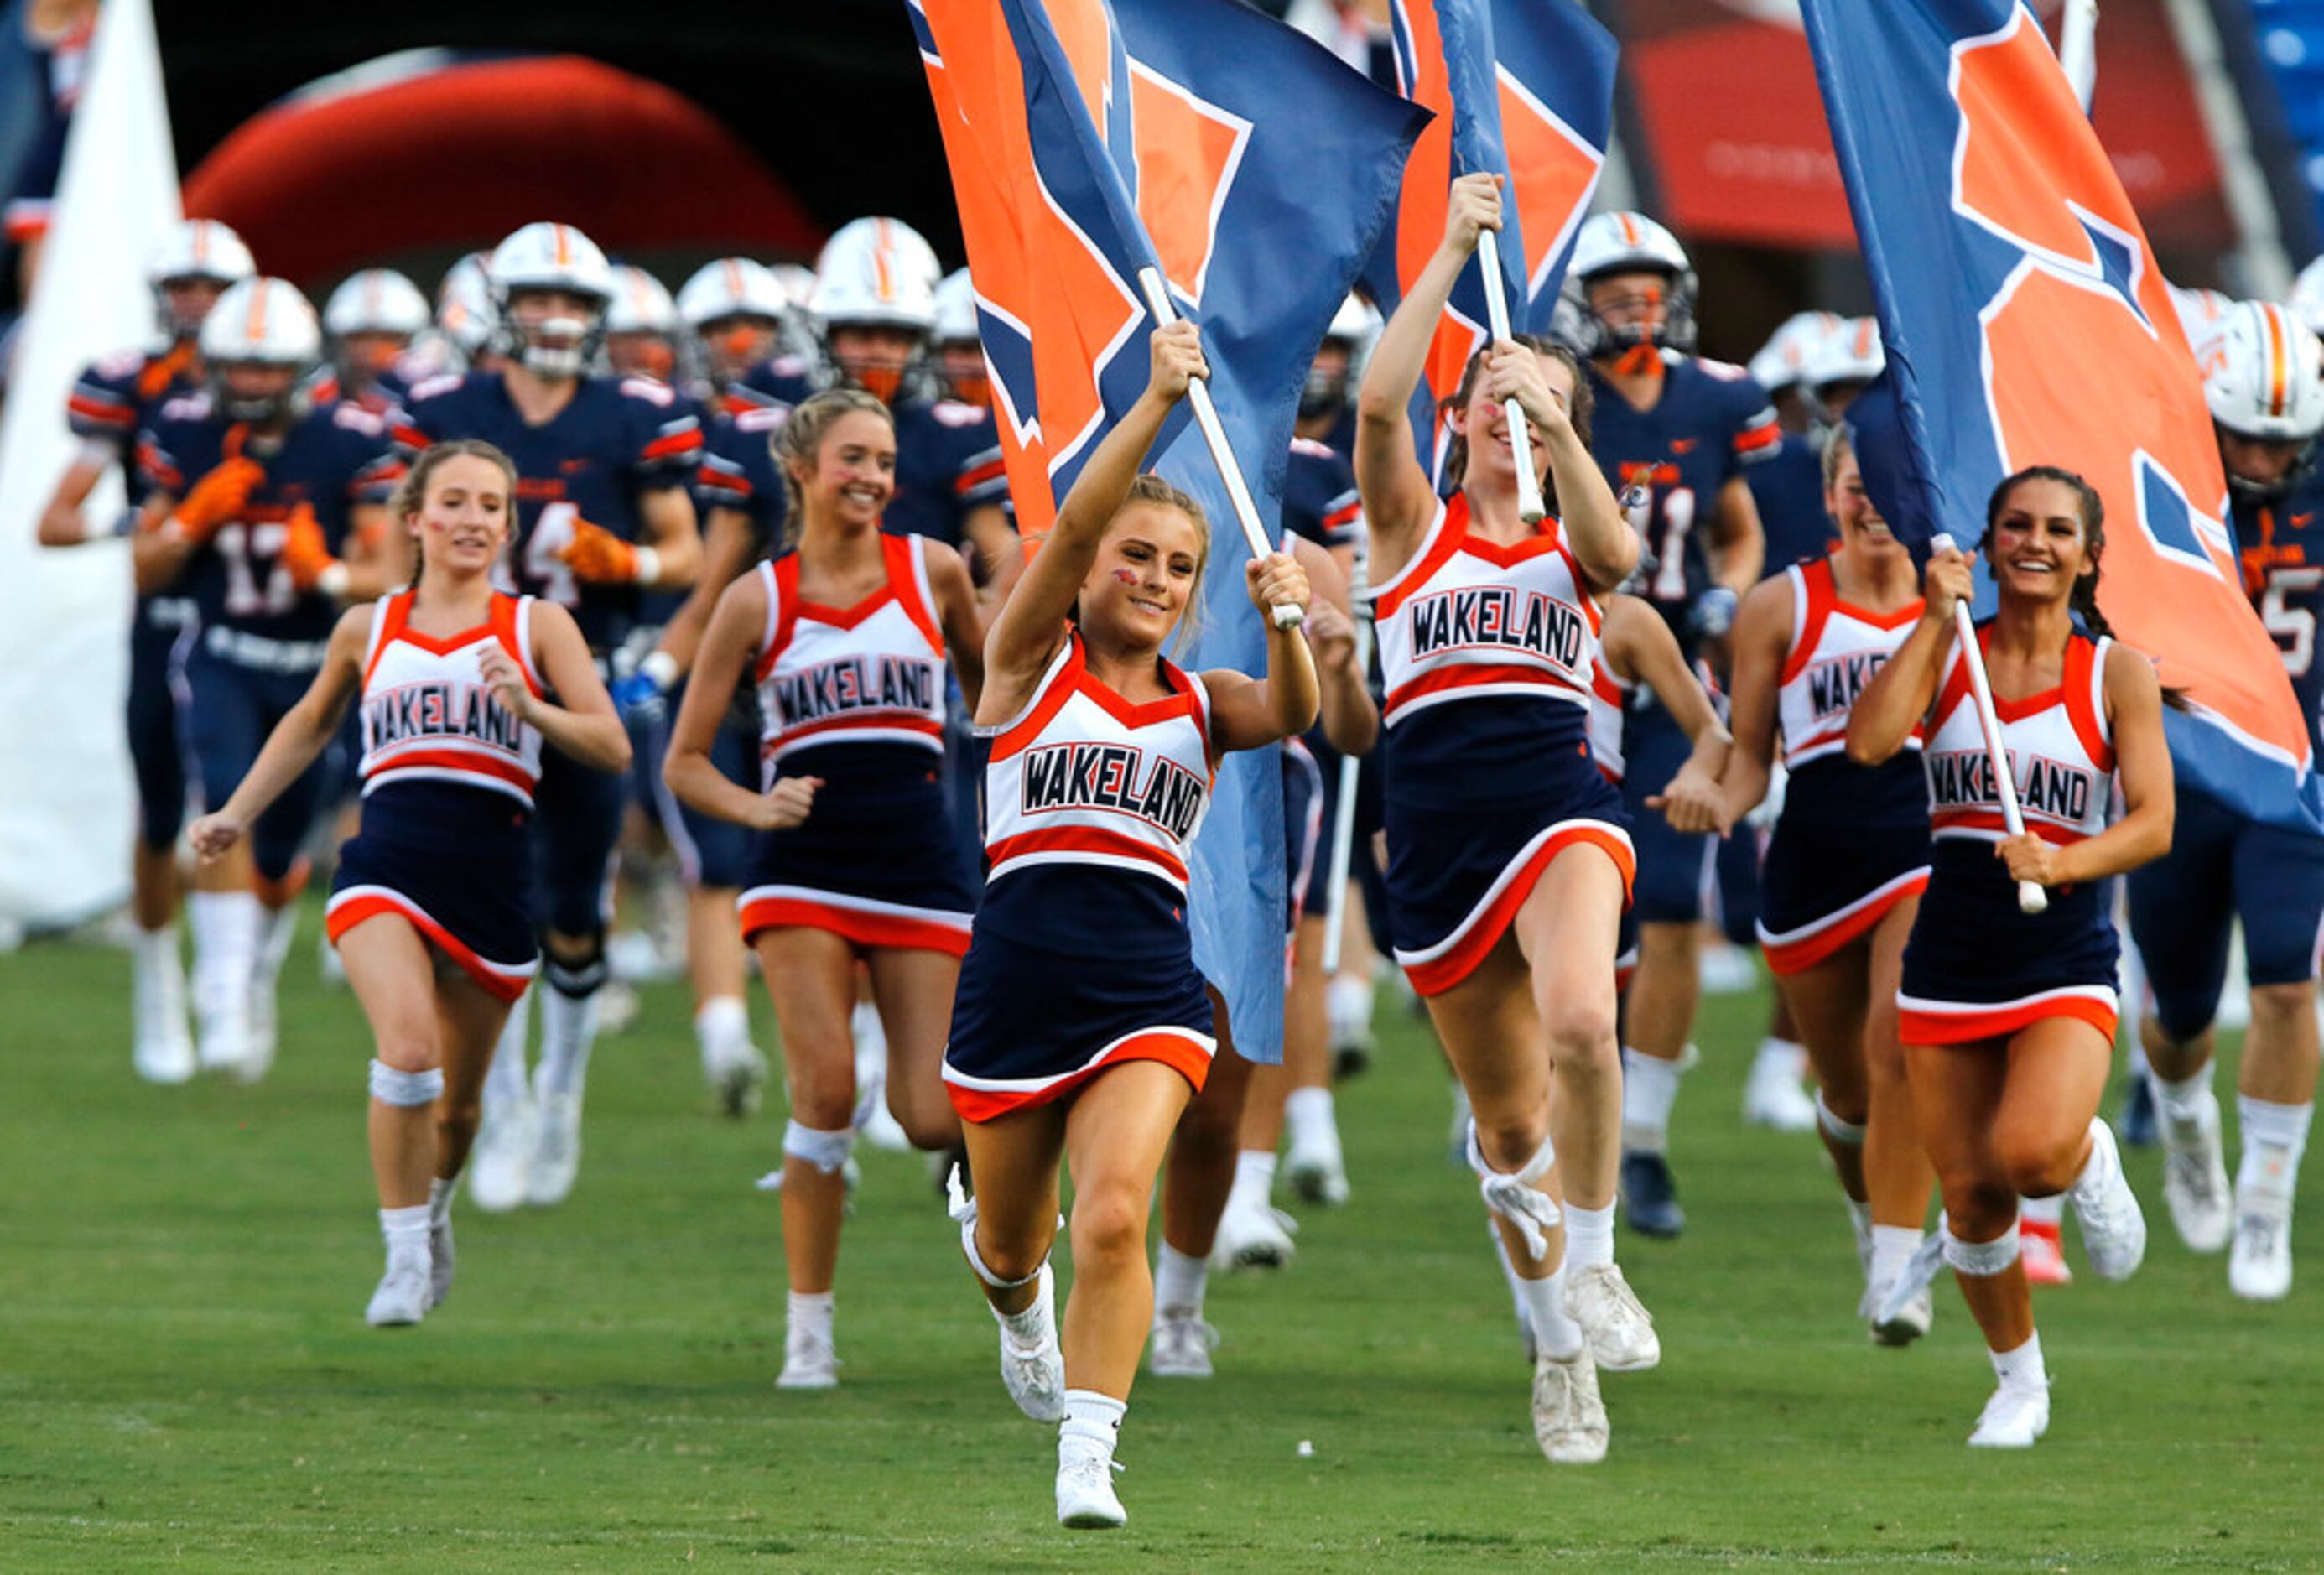 Wakeland High School cheerleader Lily Lawrence (center) runs a team flag in front of the...